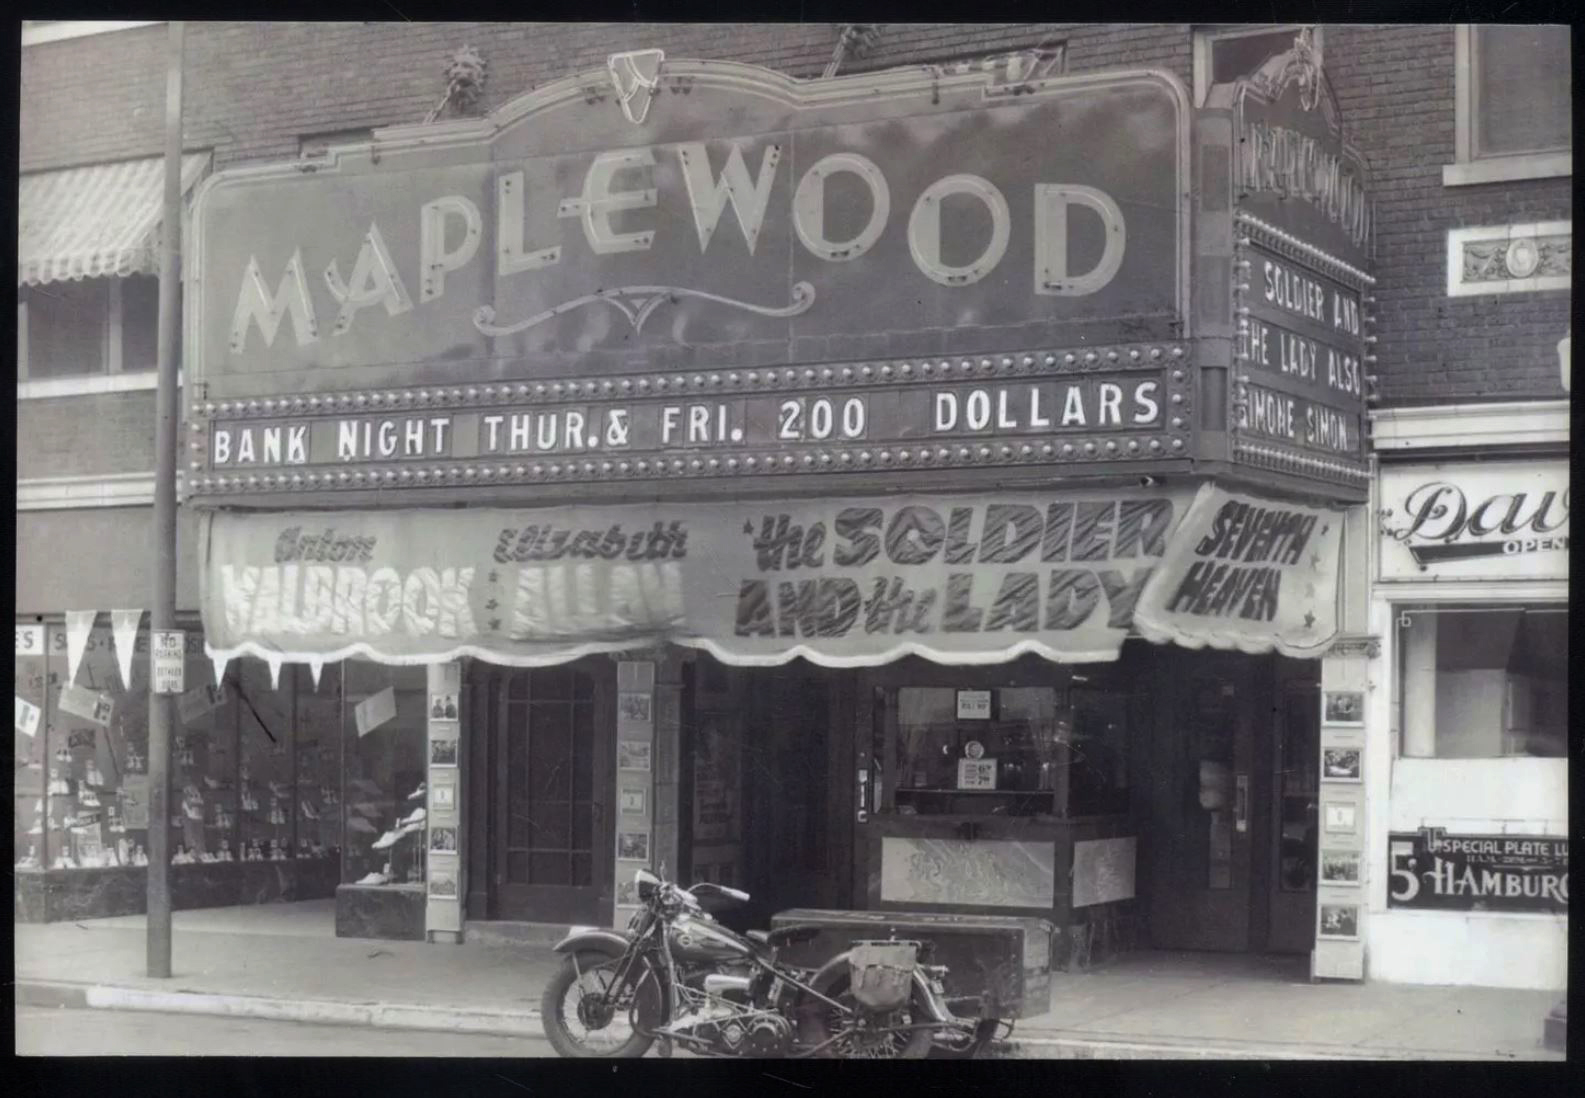 Maplewood History: A Mind Blowing Discovery – A Very Early Image of the Maplewood Theater